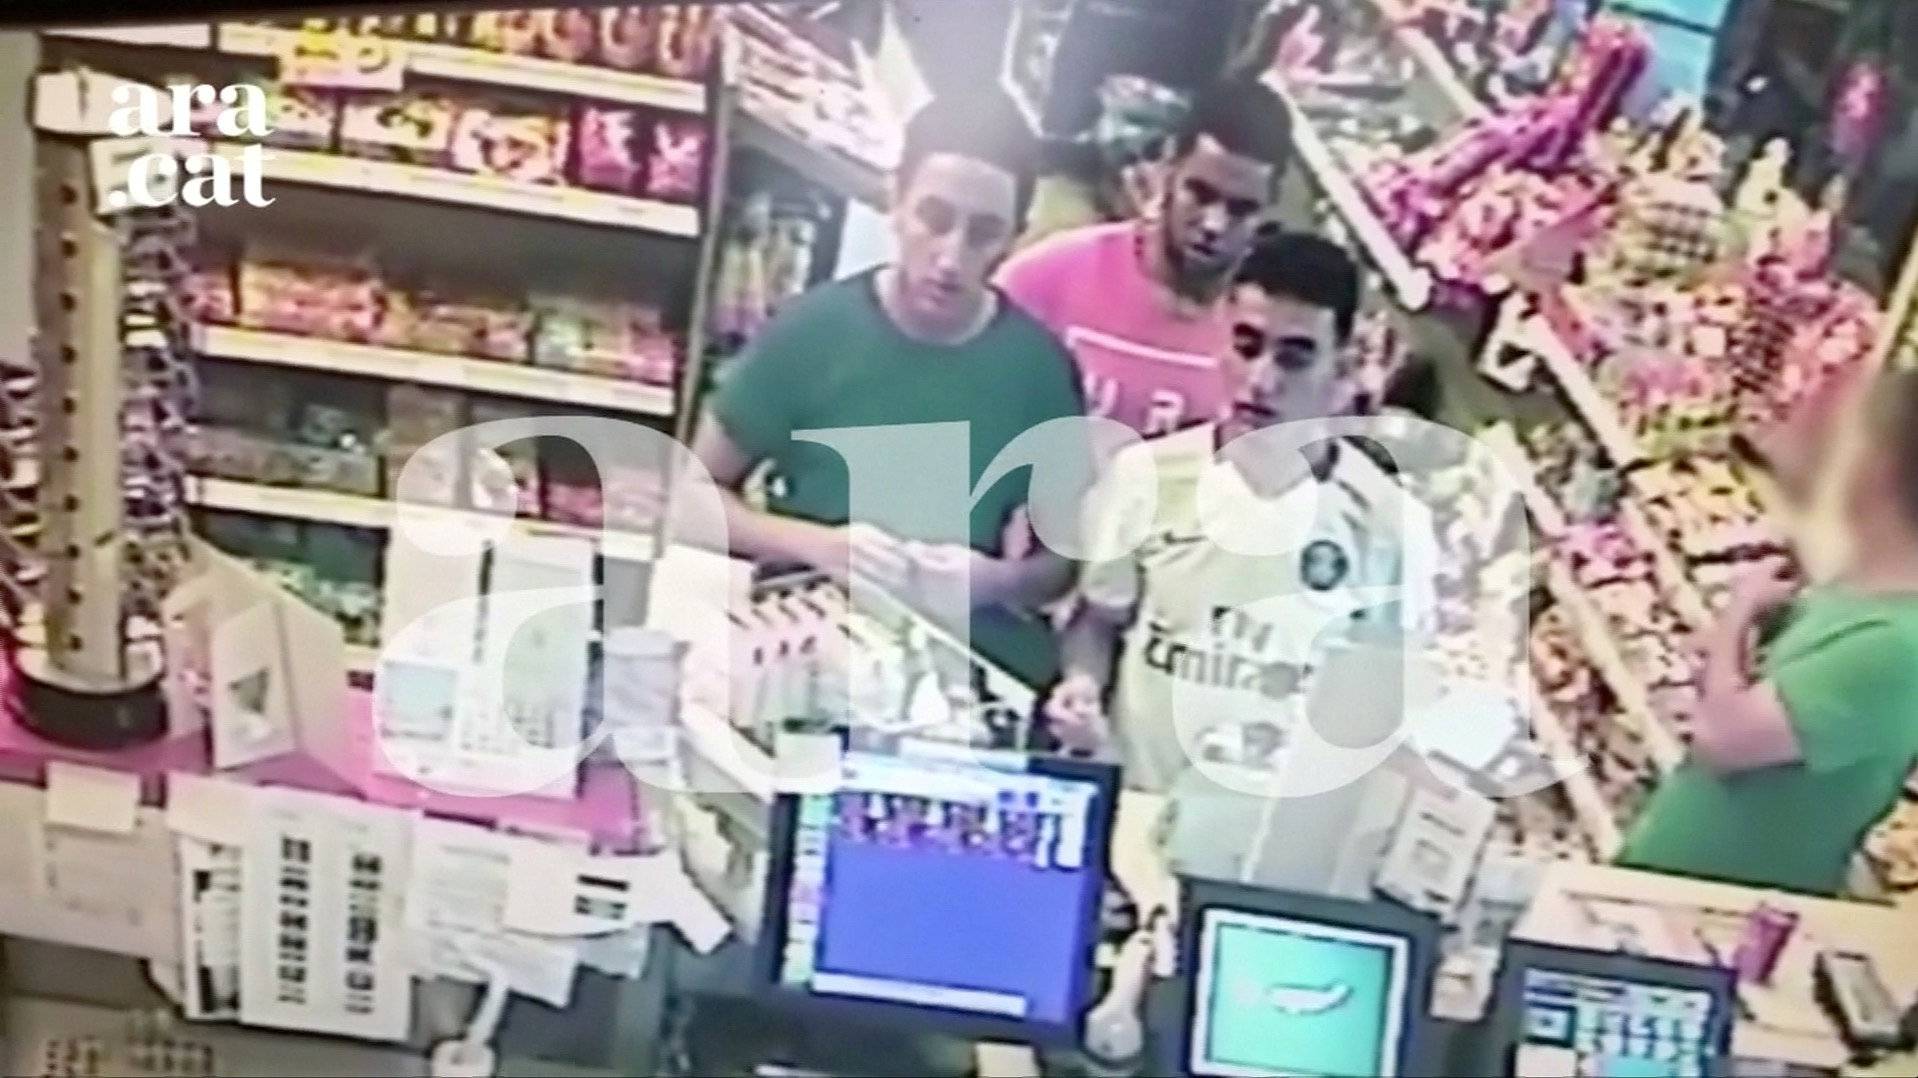 Three attackers who were shot dead in Cambrils on the night of the attack in Barcelona last week are caught on a petrol station's surveillance camera close to the town just hours before the attack, in this still frame taken from video